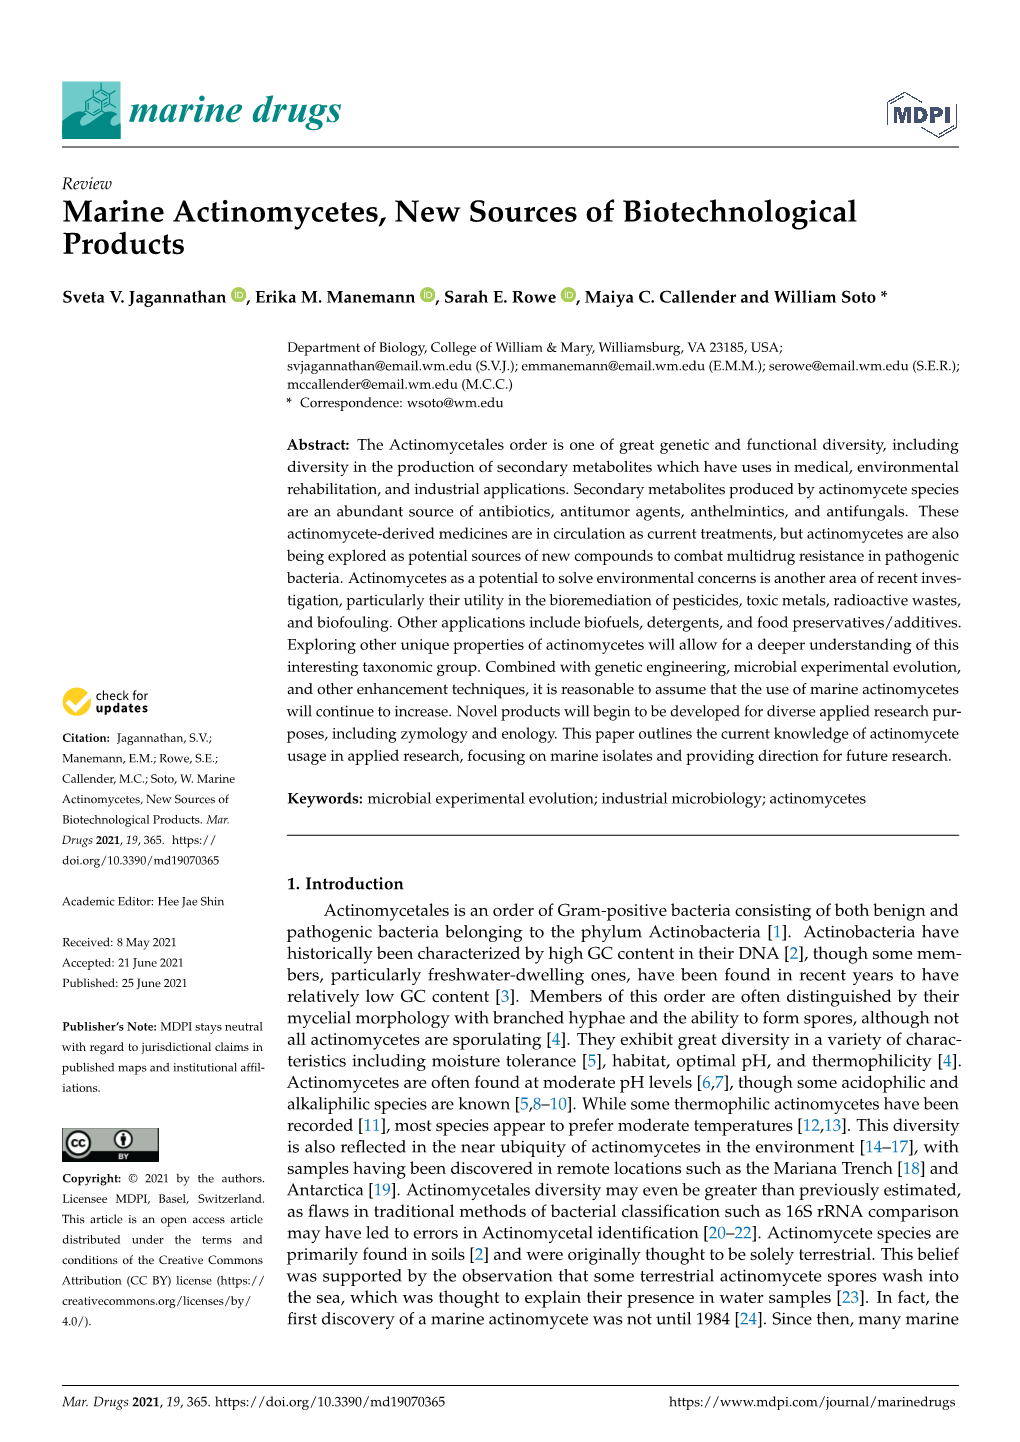 Marine Actinomycetes, New Sources of Biotechnological Products